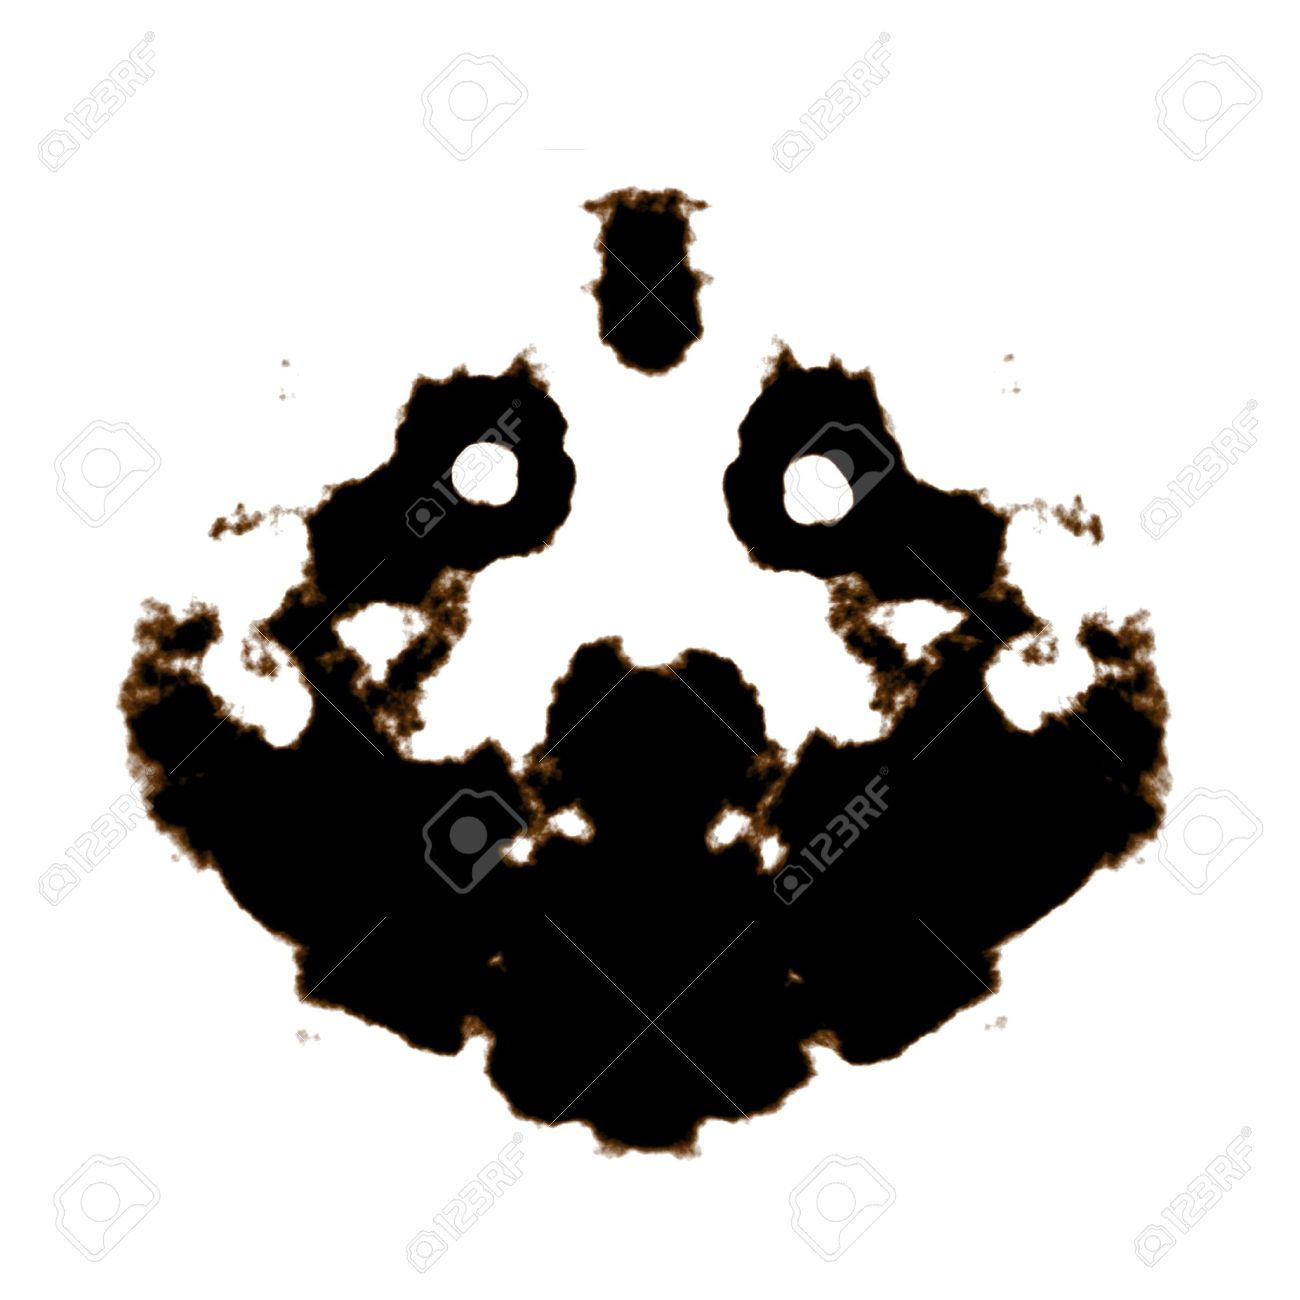 Rorschach Test Of An Ink Blot Card Stock Photo, Picture And.